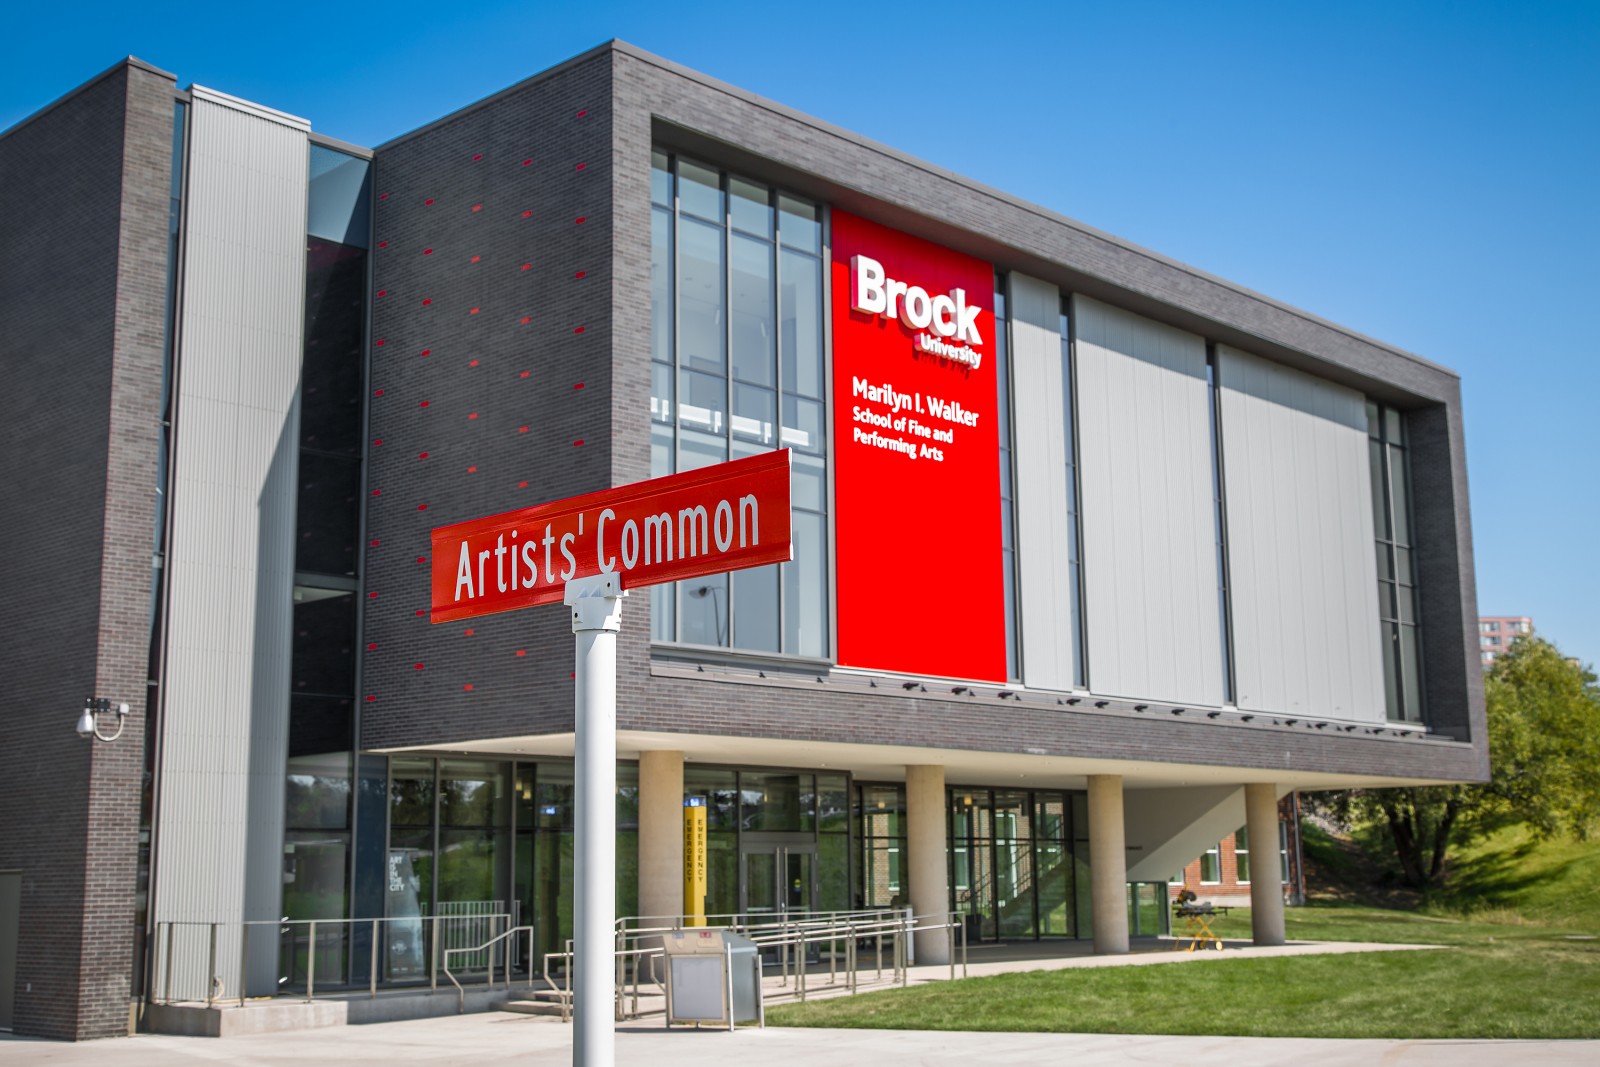 The street sign for Artists' Common can be seen in front of the new MIWSFPA.